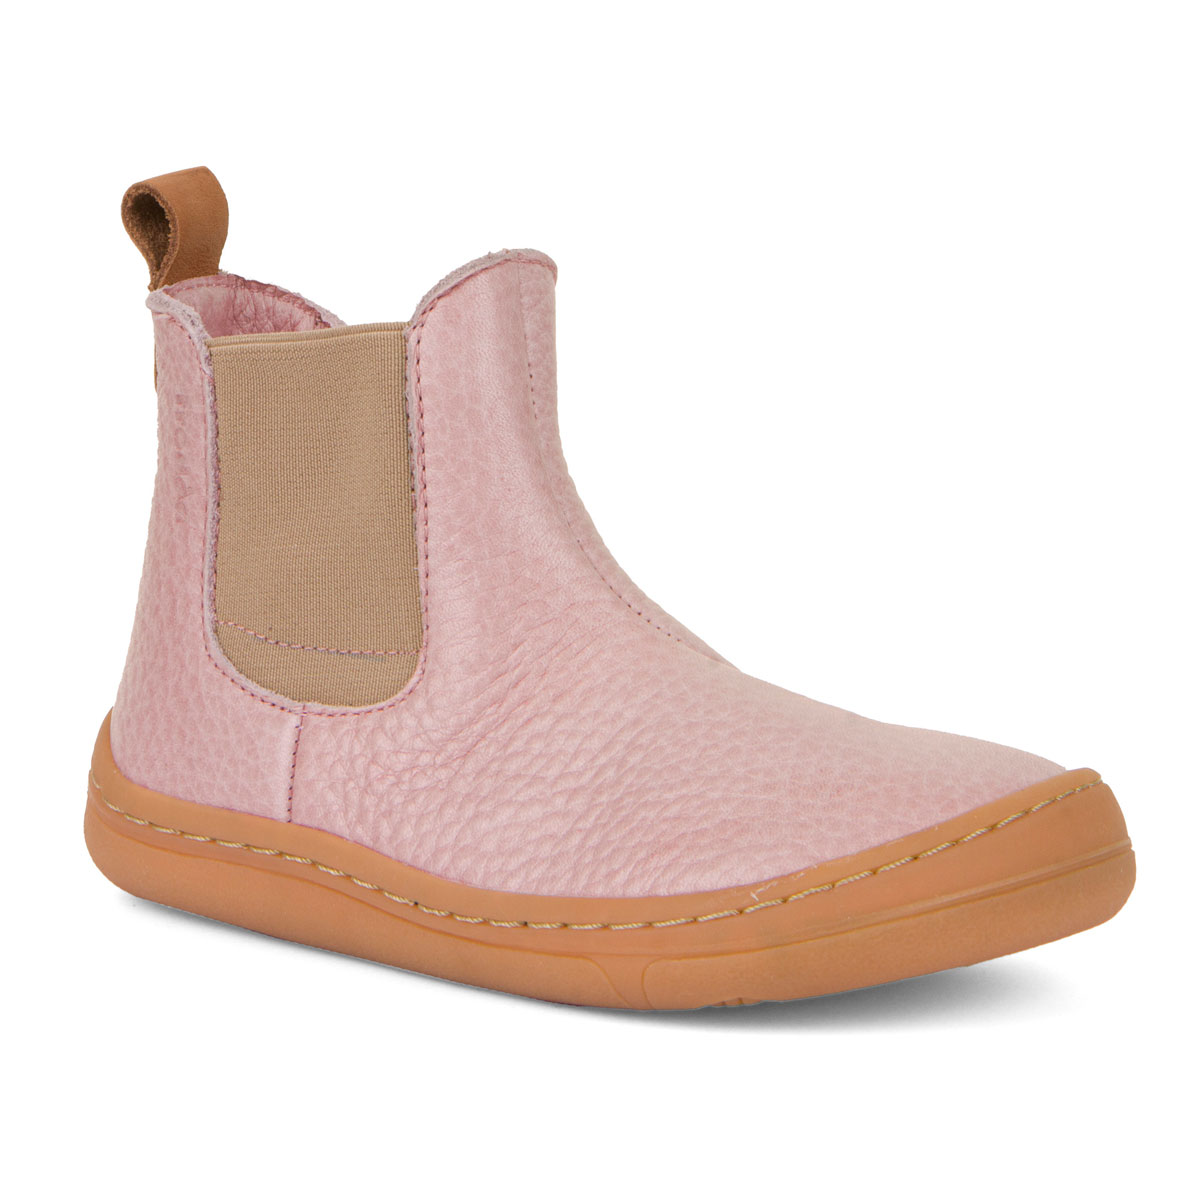 Barefoot Boot Chelys pink